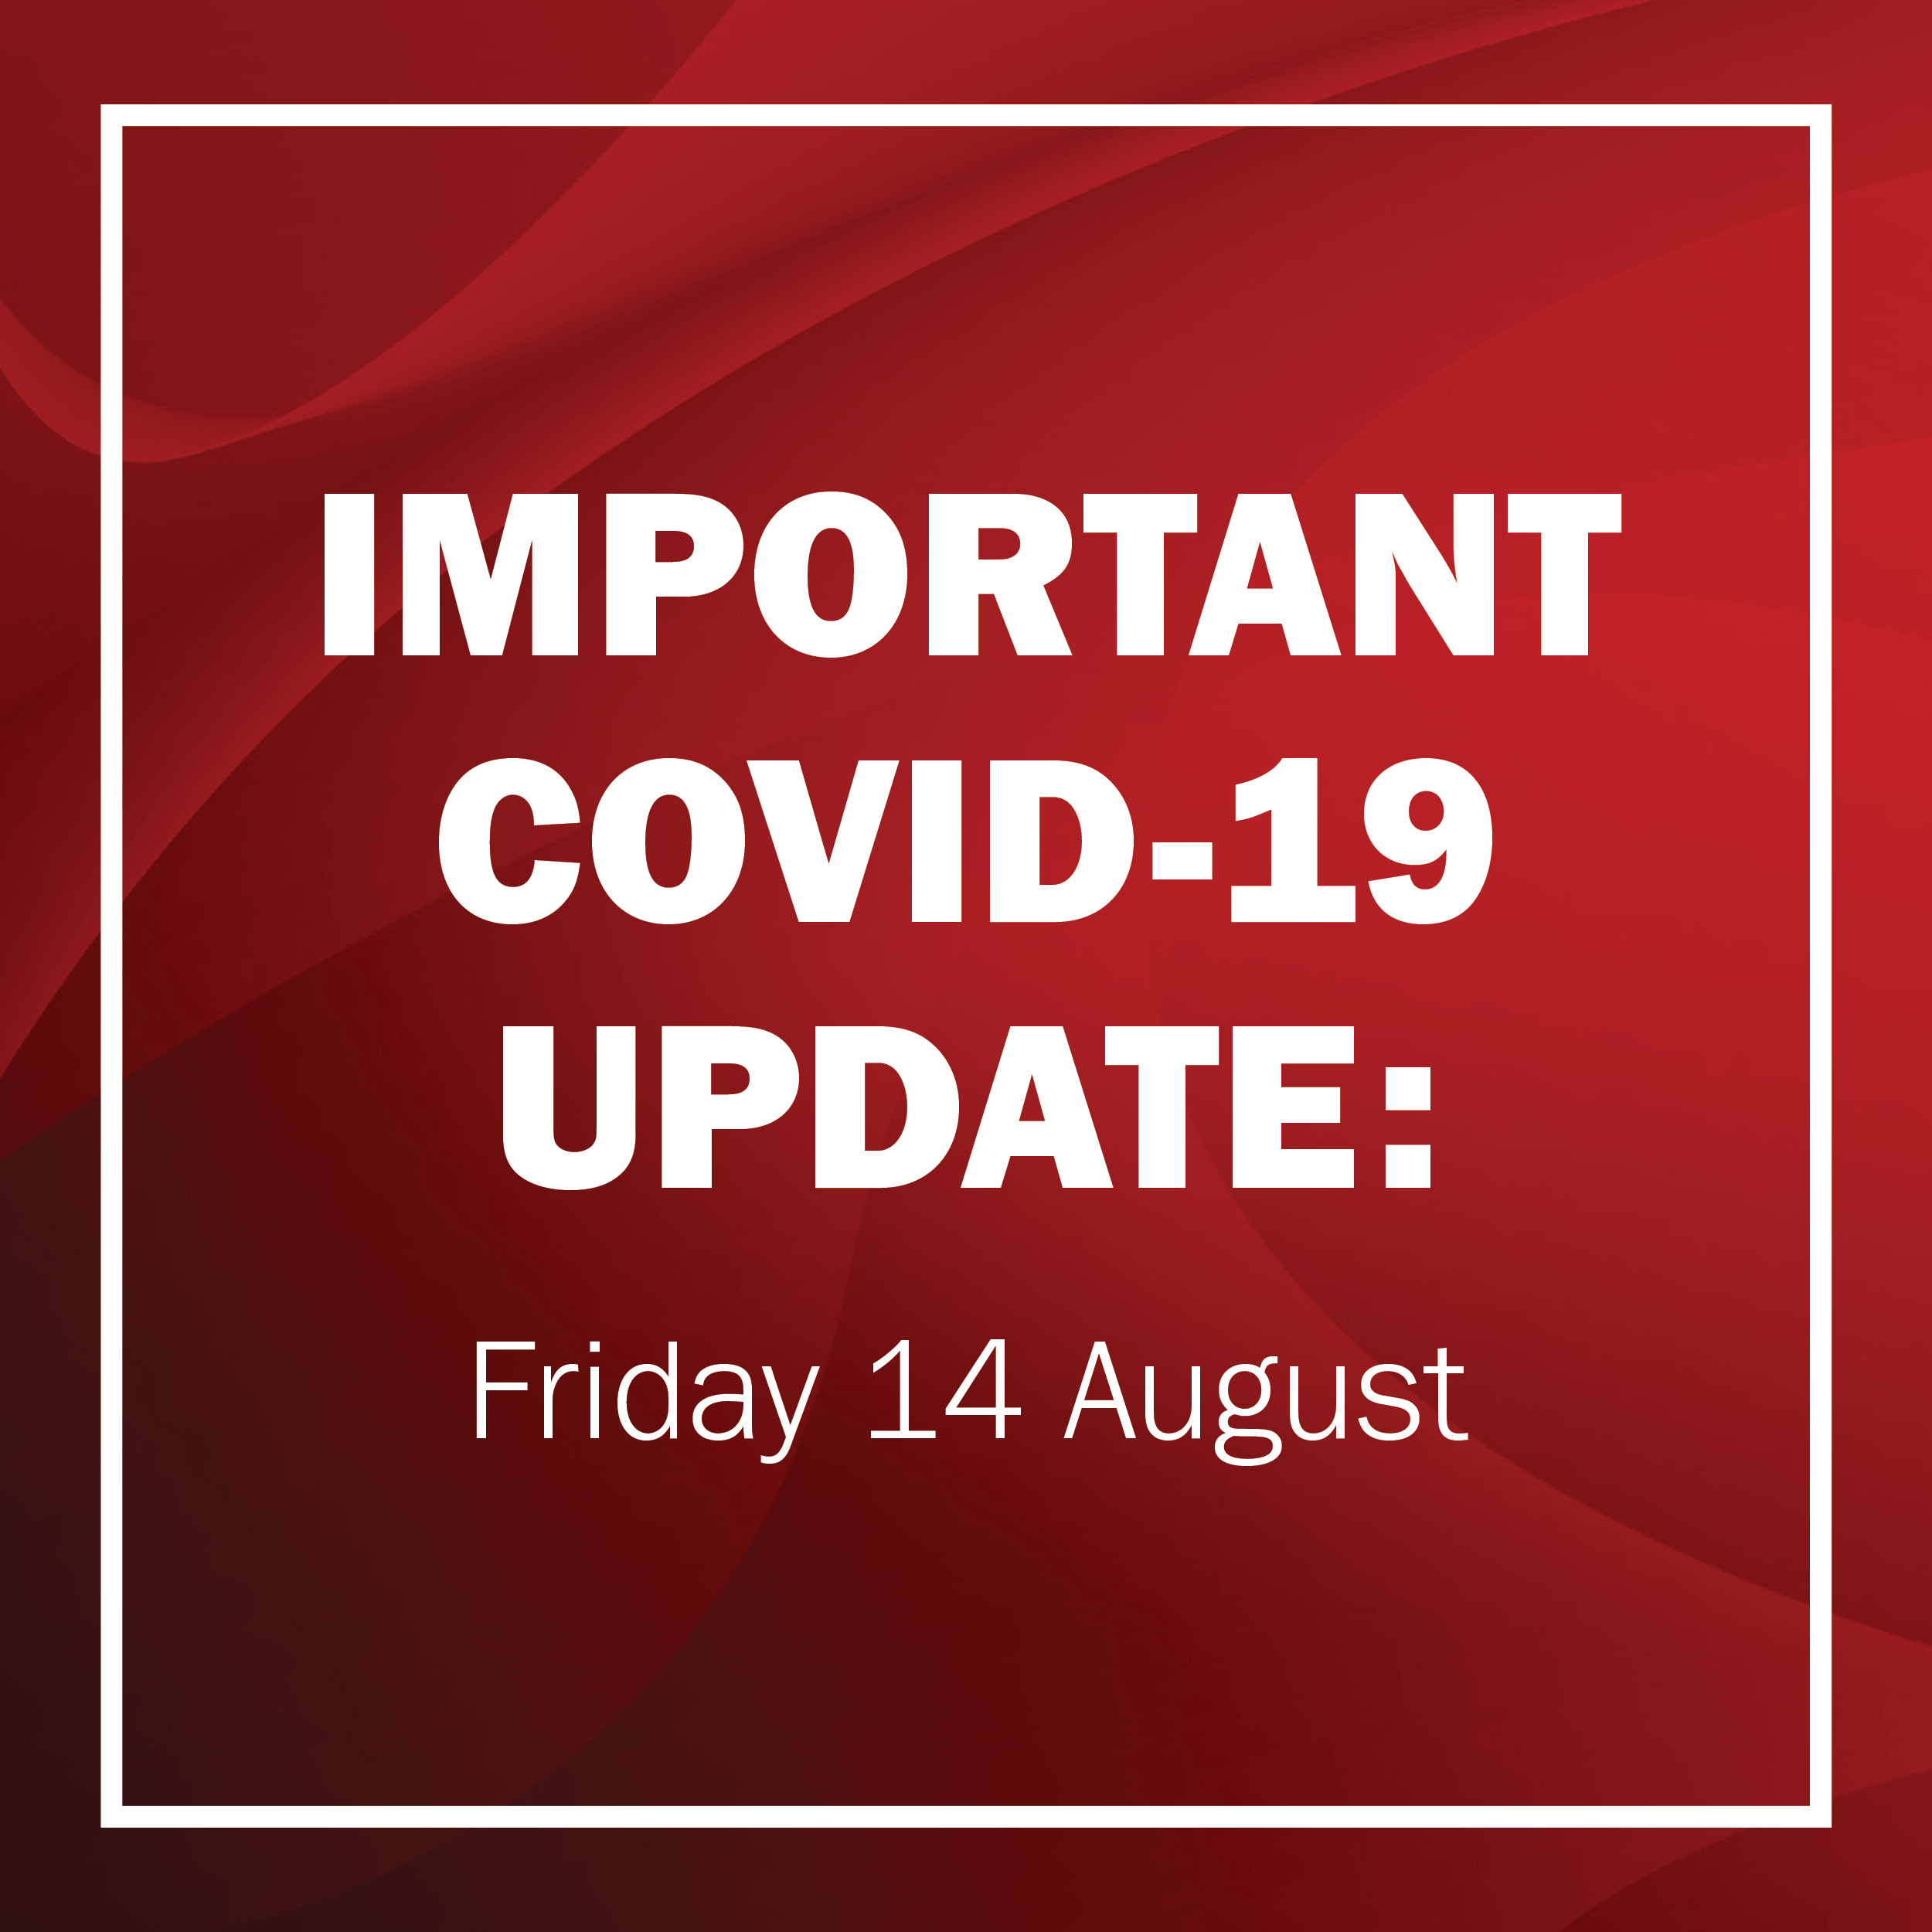 COVID-19 response: Friday 14 August